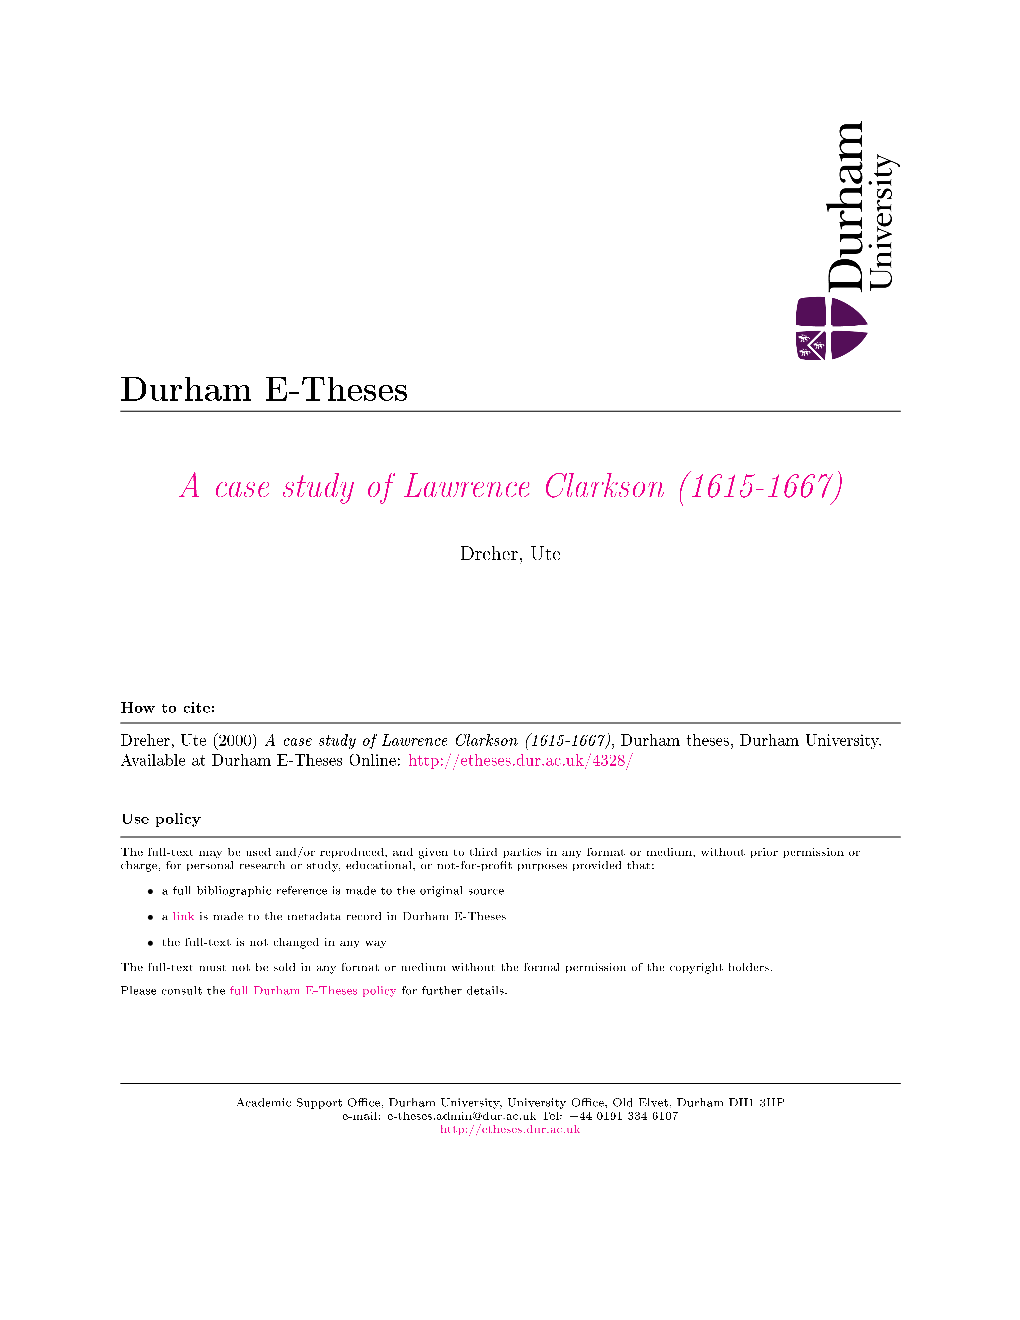 A Case Study of Lawrence Clarkson (1615-1667)